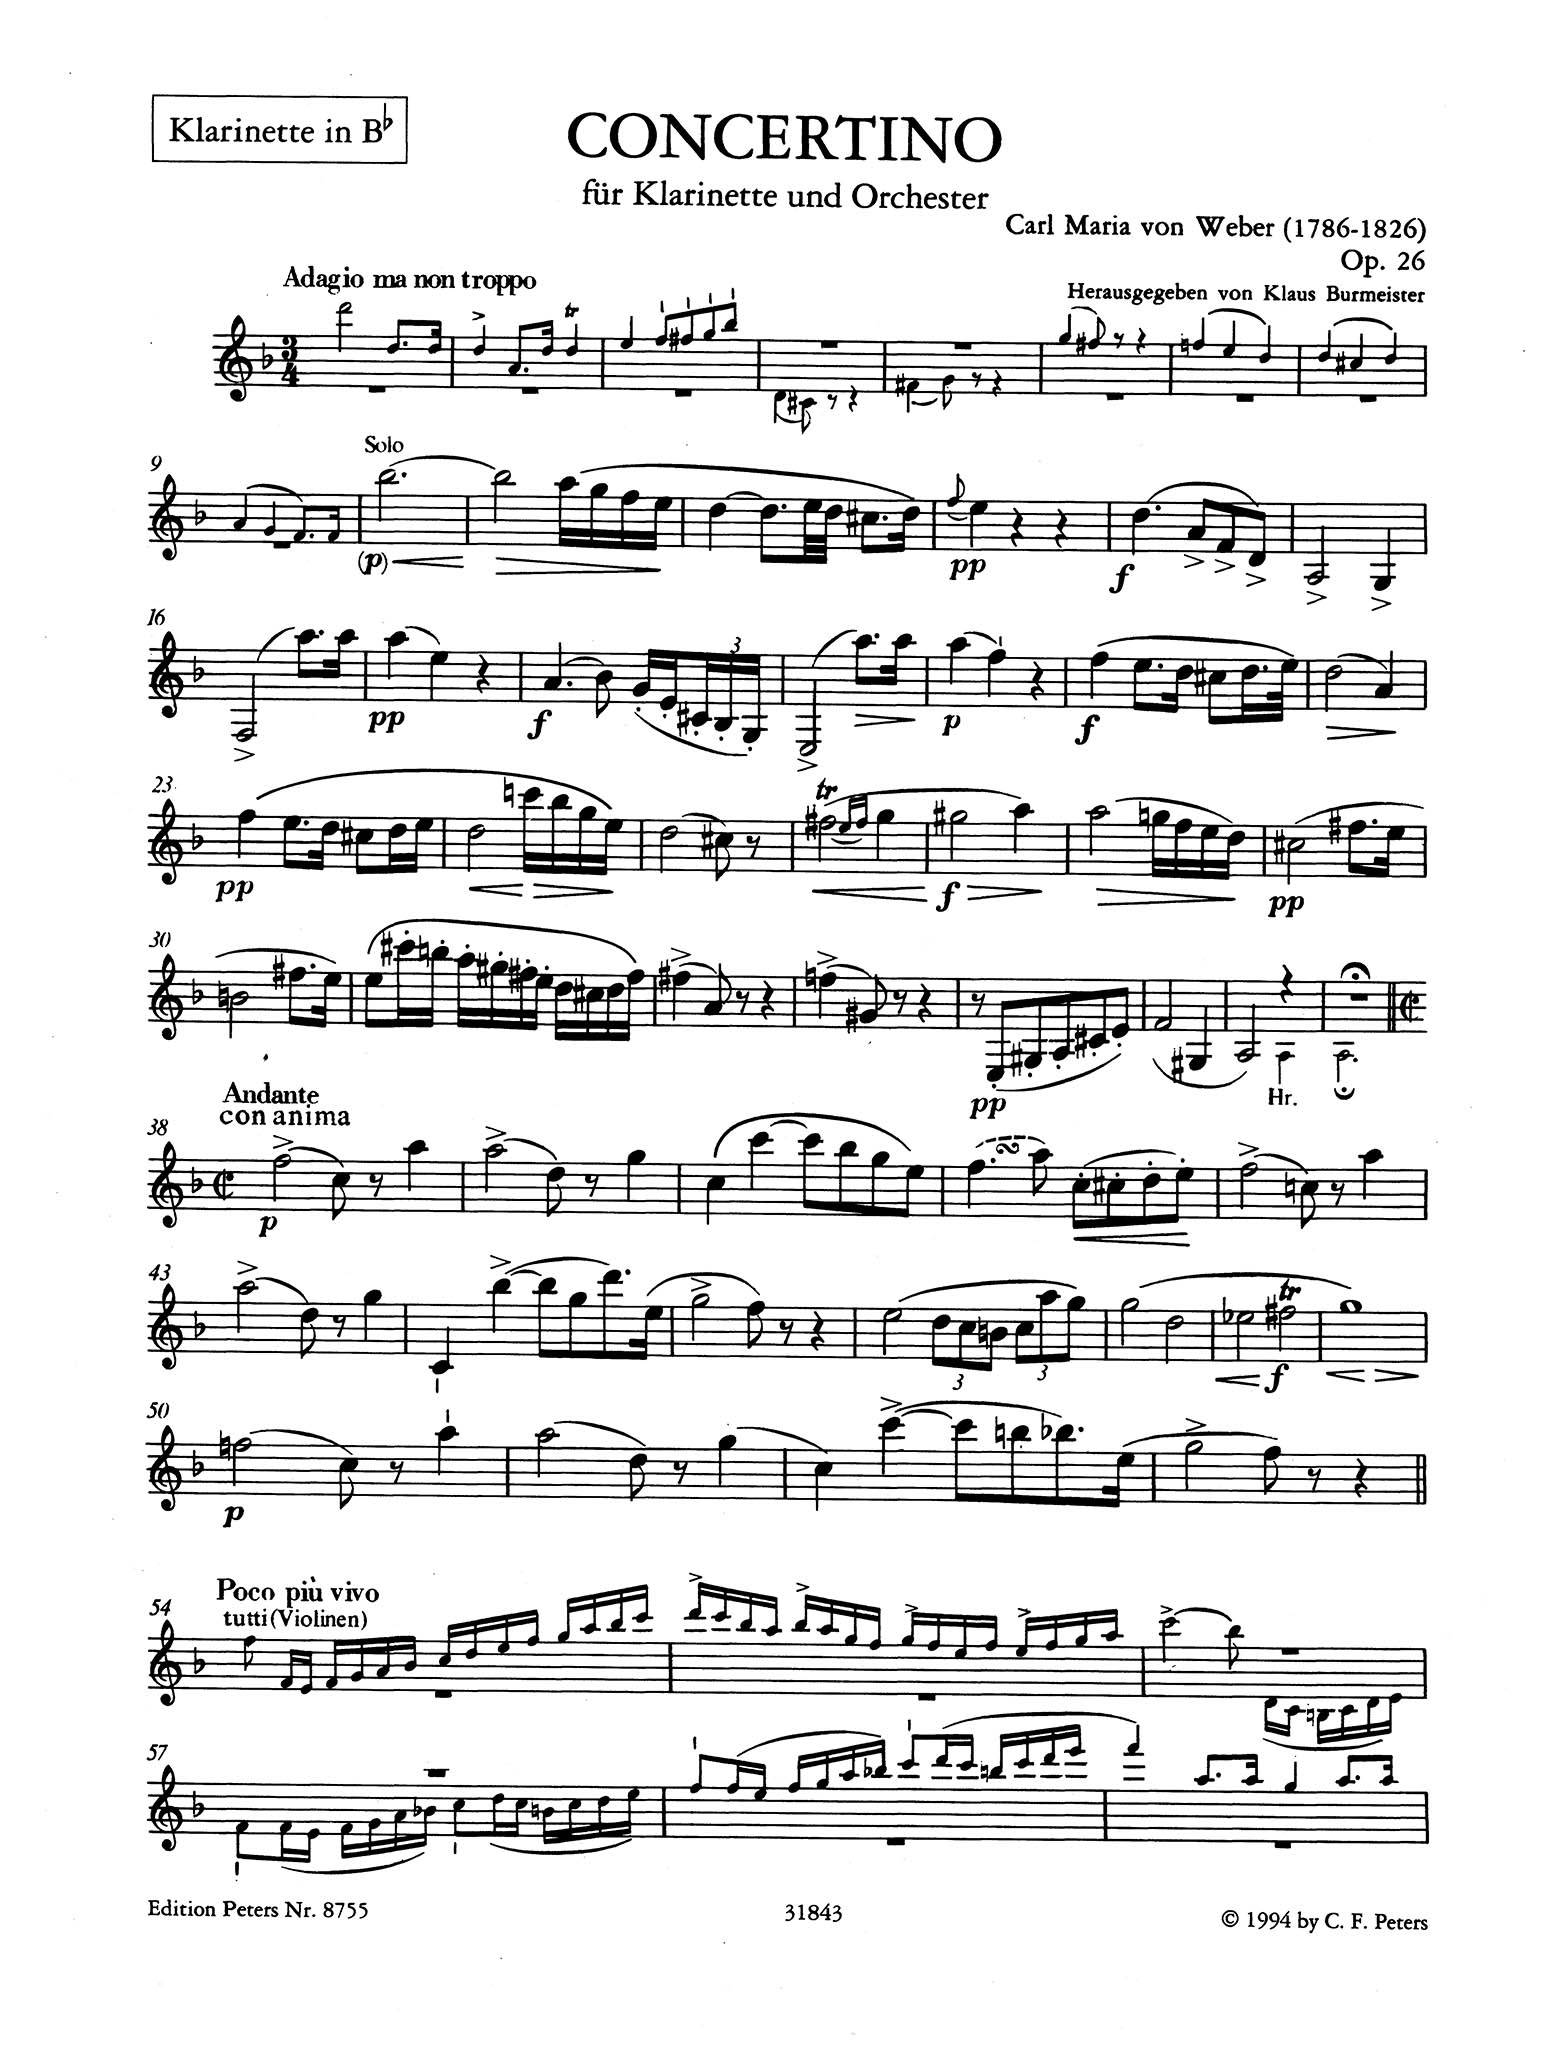 Concertino in E-flat Major, Op. 26, J. 109 Clarinet part